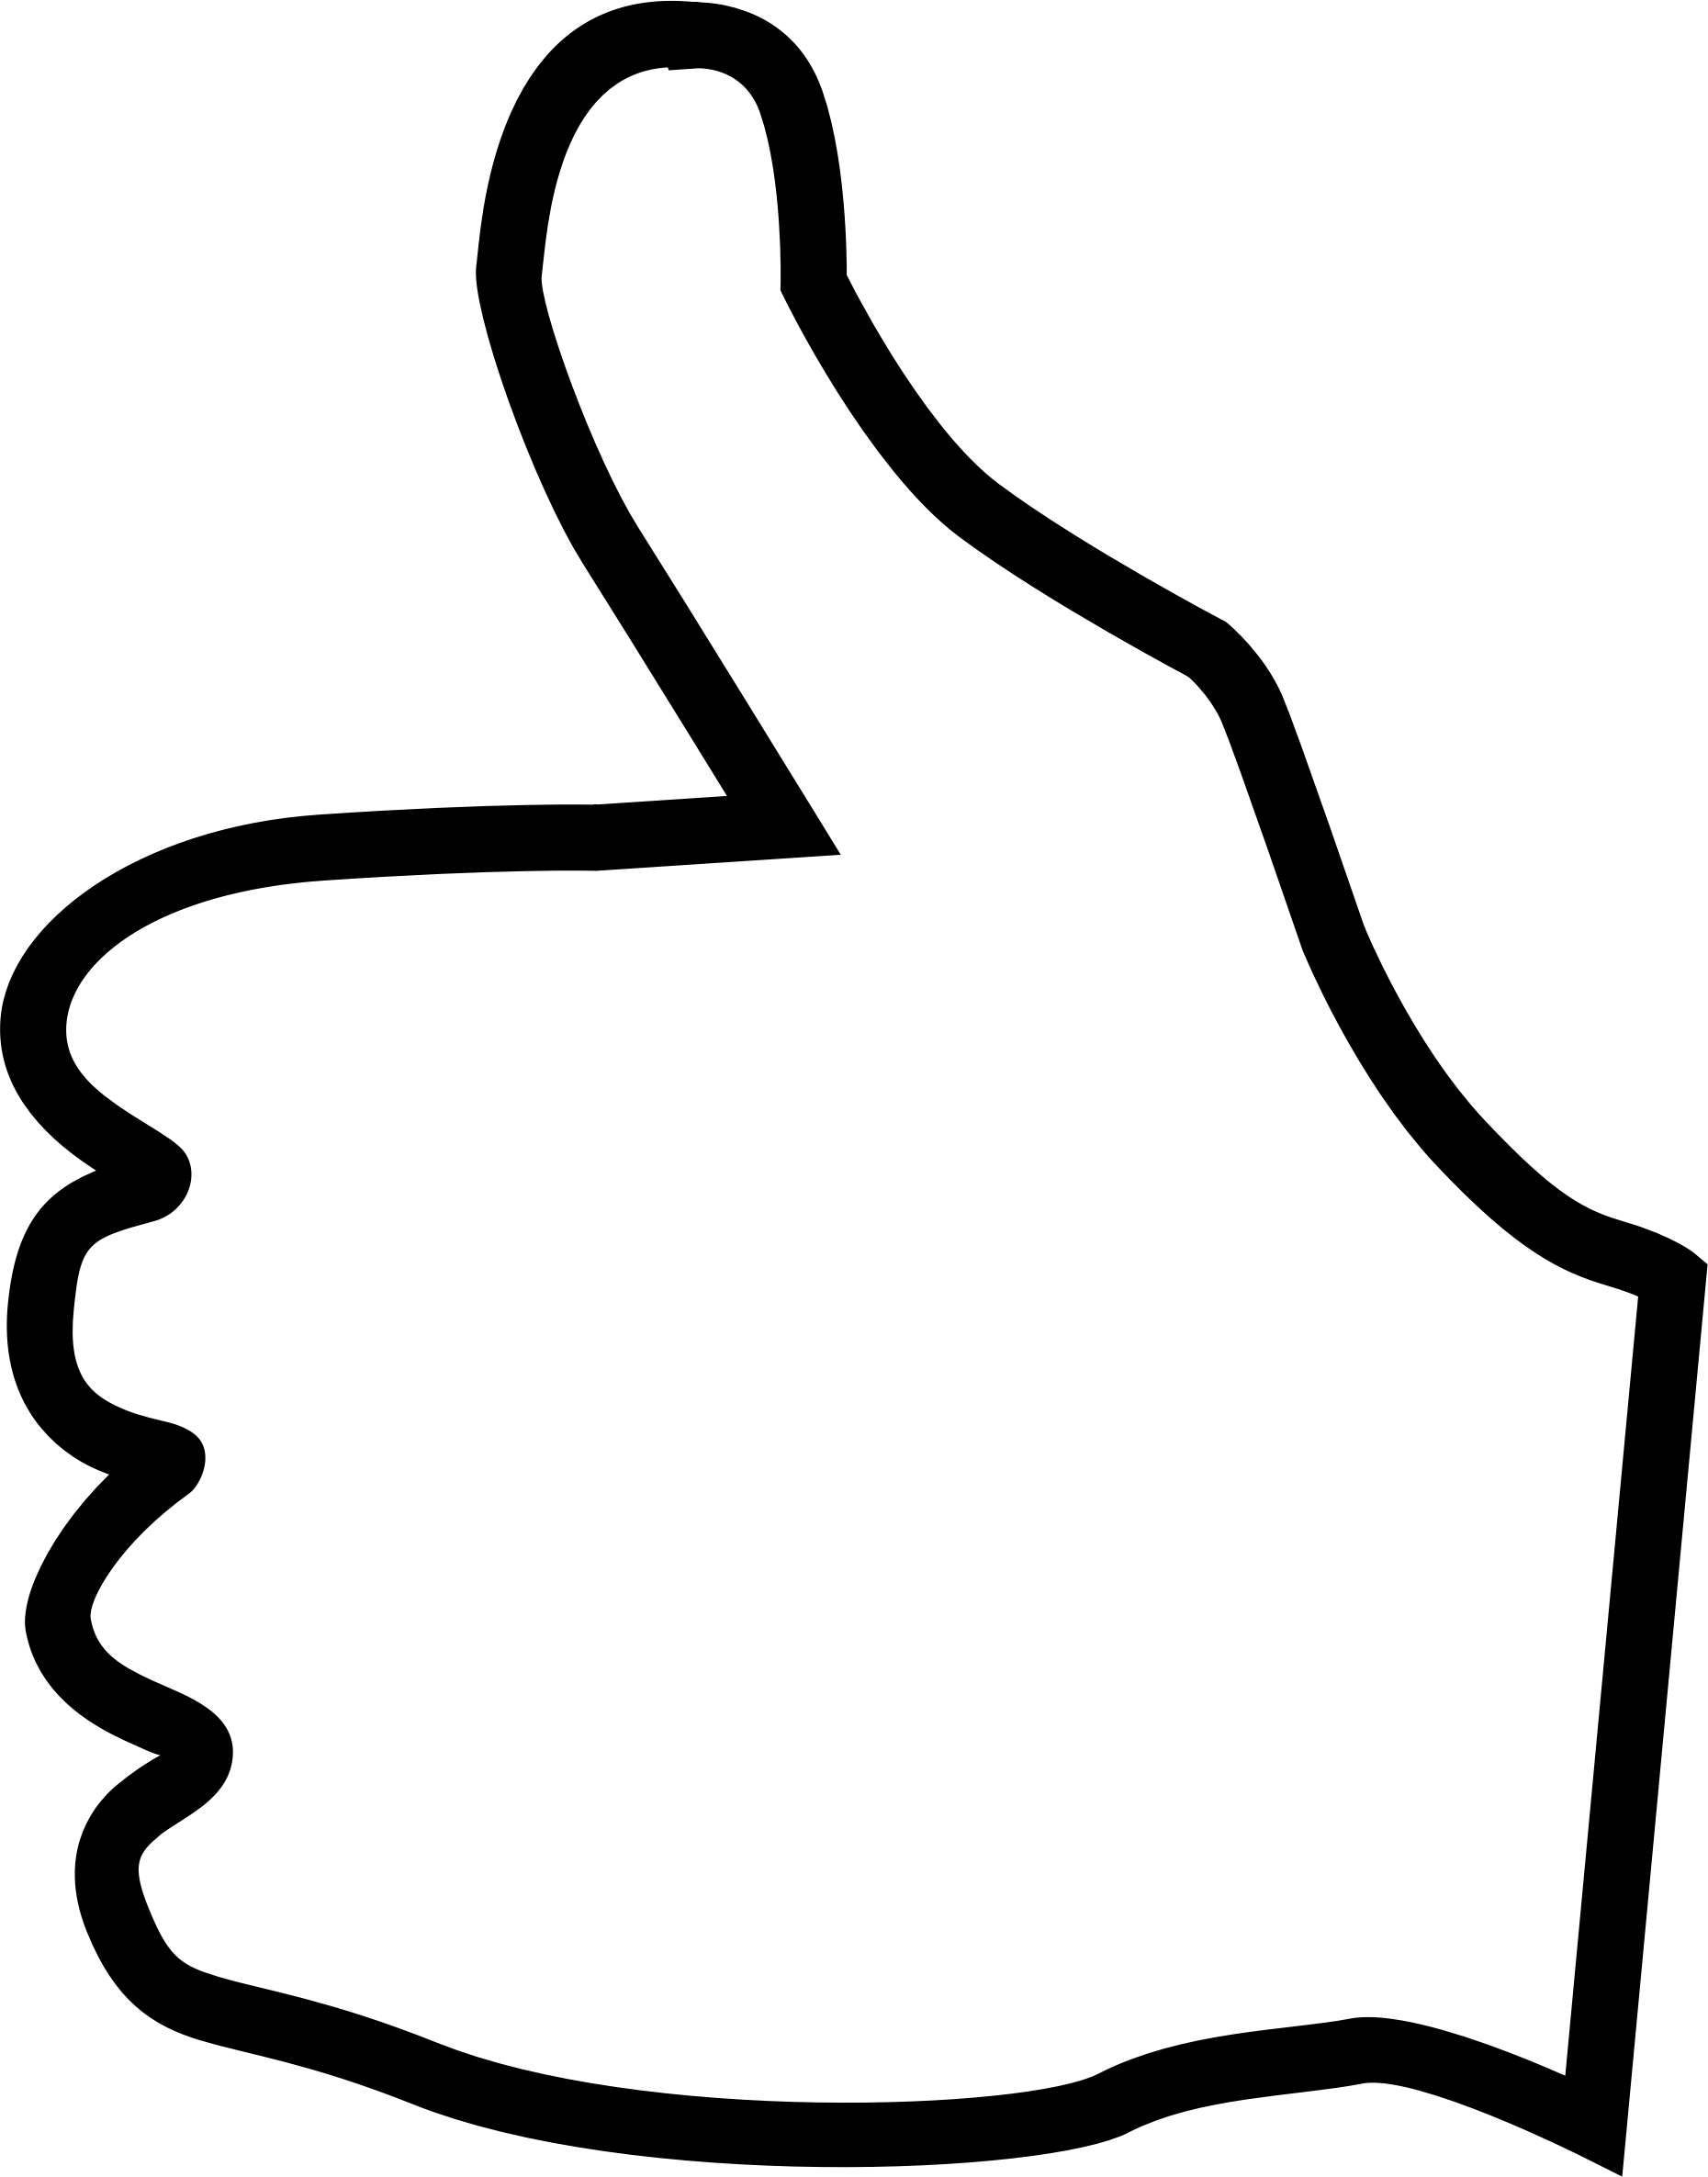 Thumbs Up Clip Art Smiley face clip art thumbs up free clipart images 3